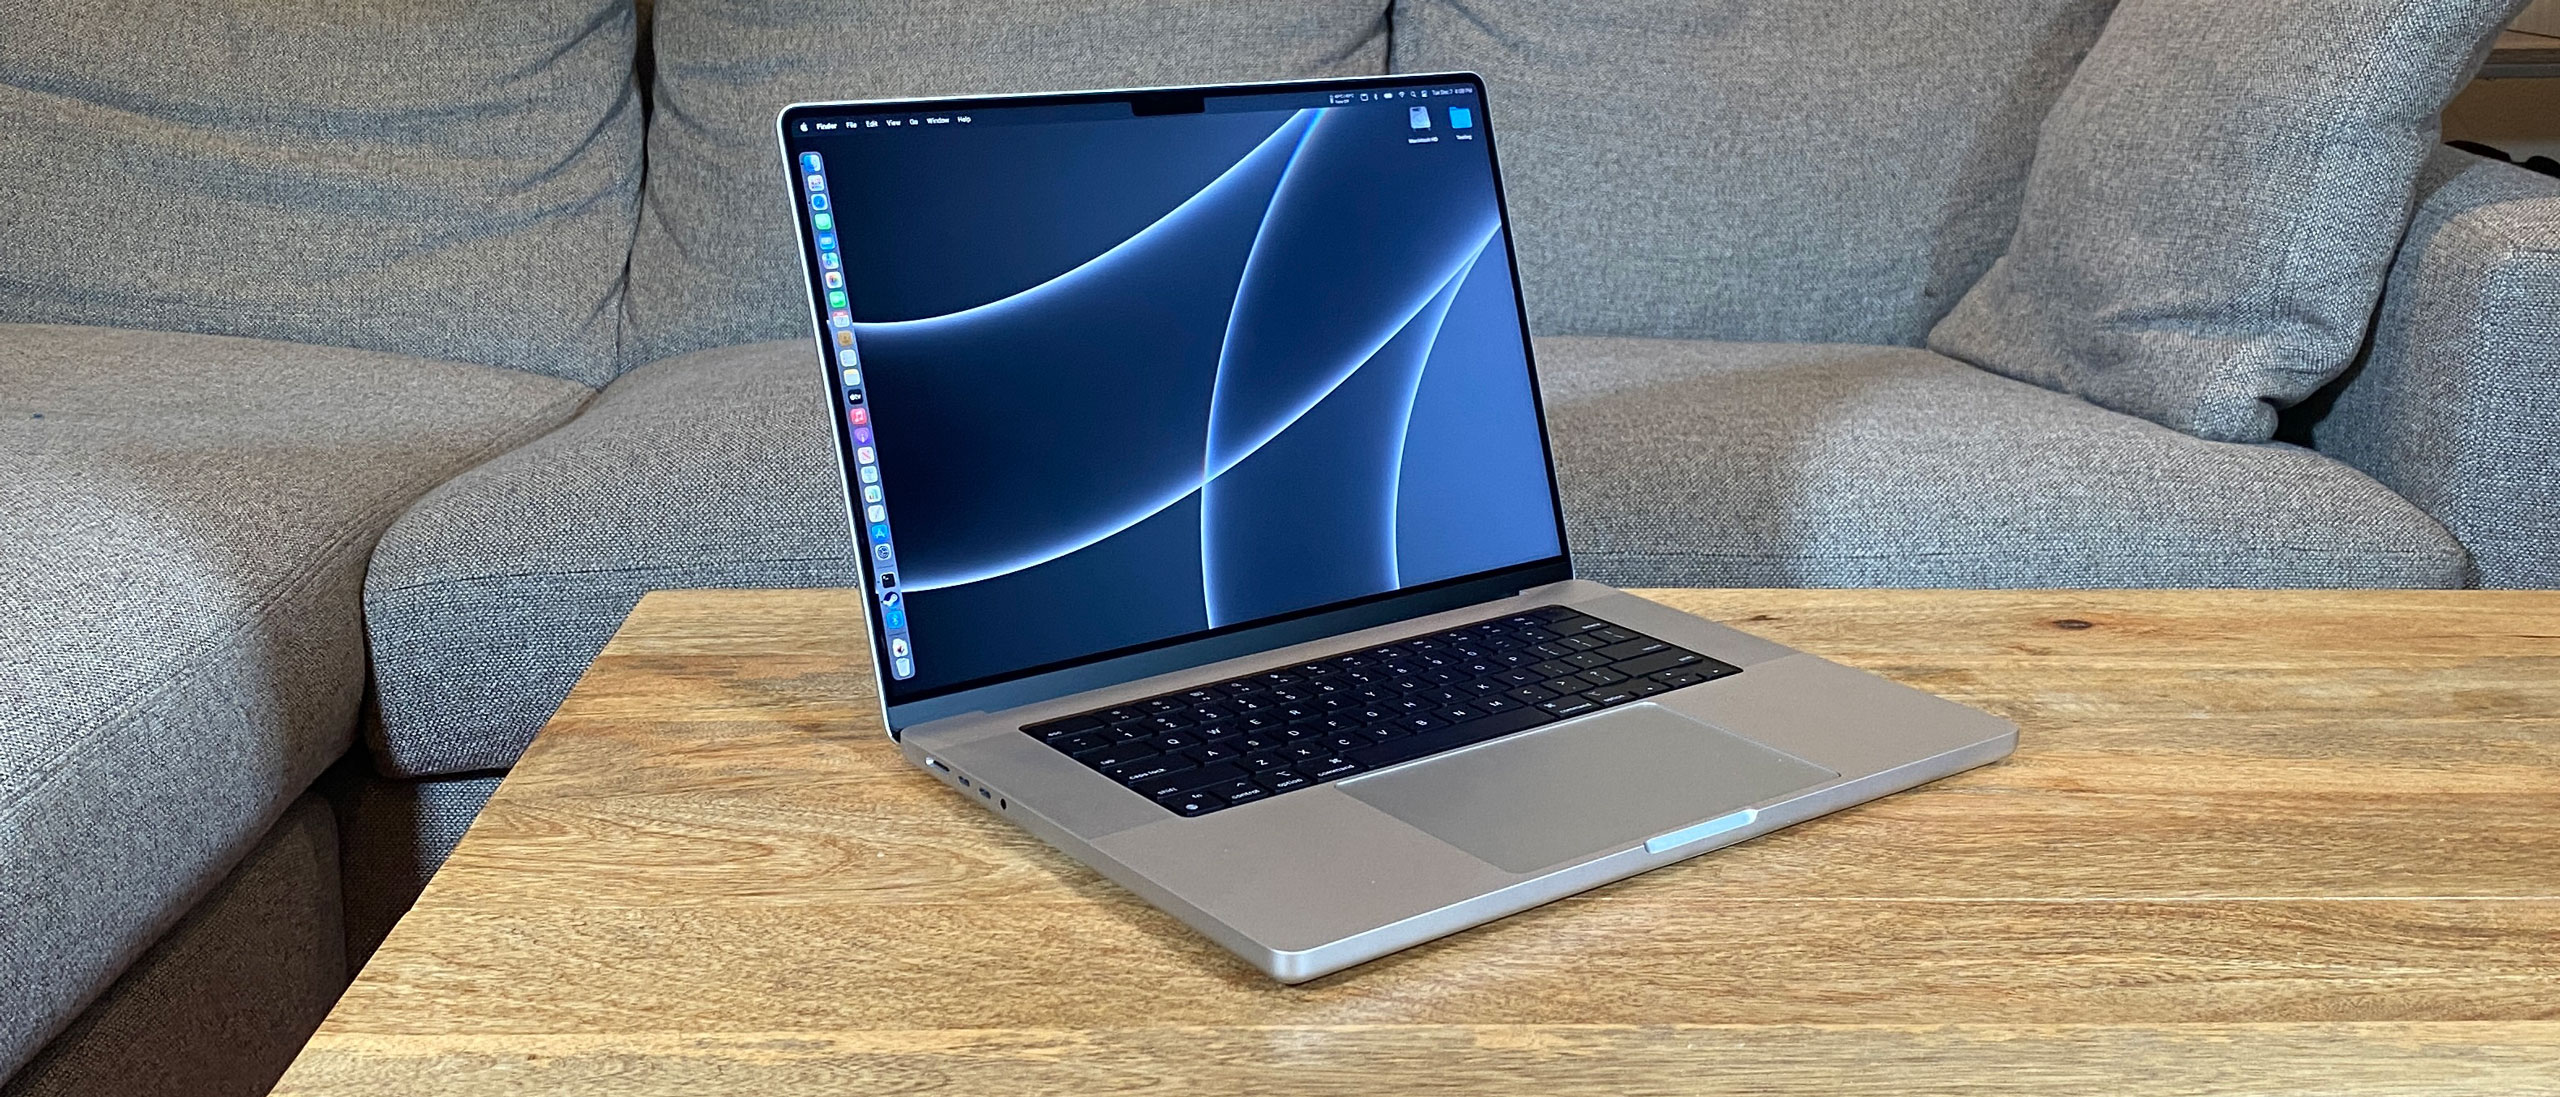 MacBook Pro (16-inch, 2021) Review: M1 Max Shows Real Power 